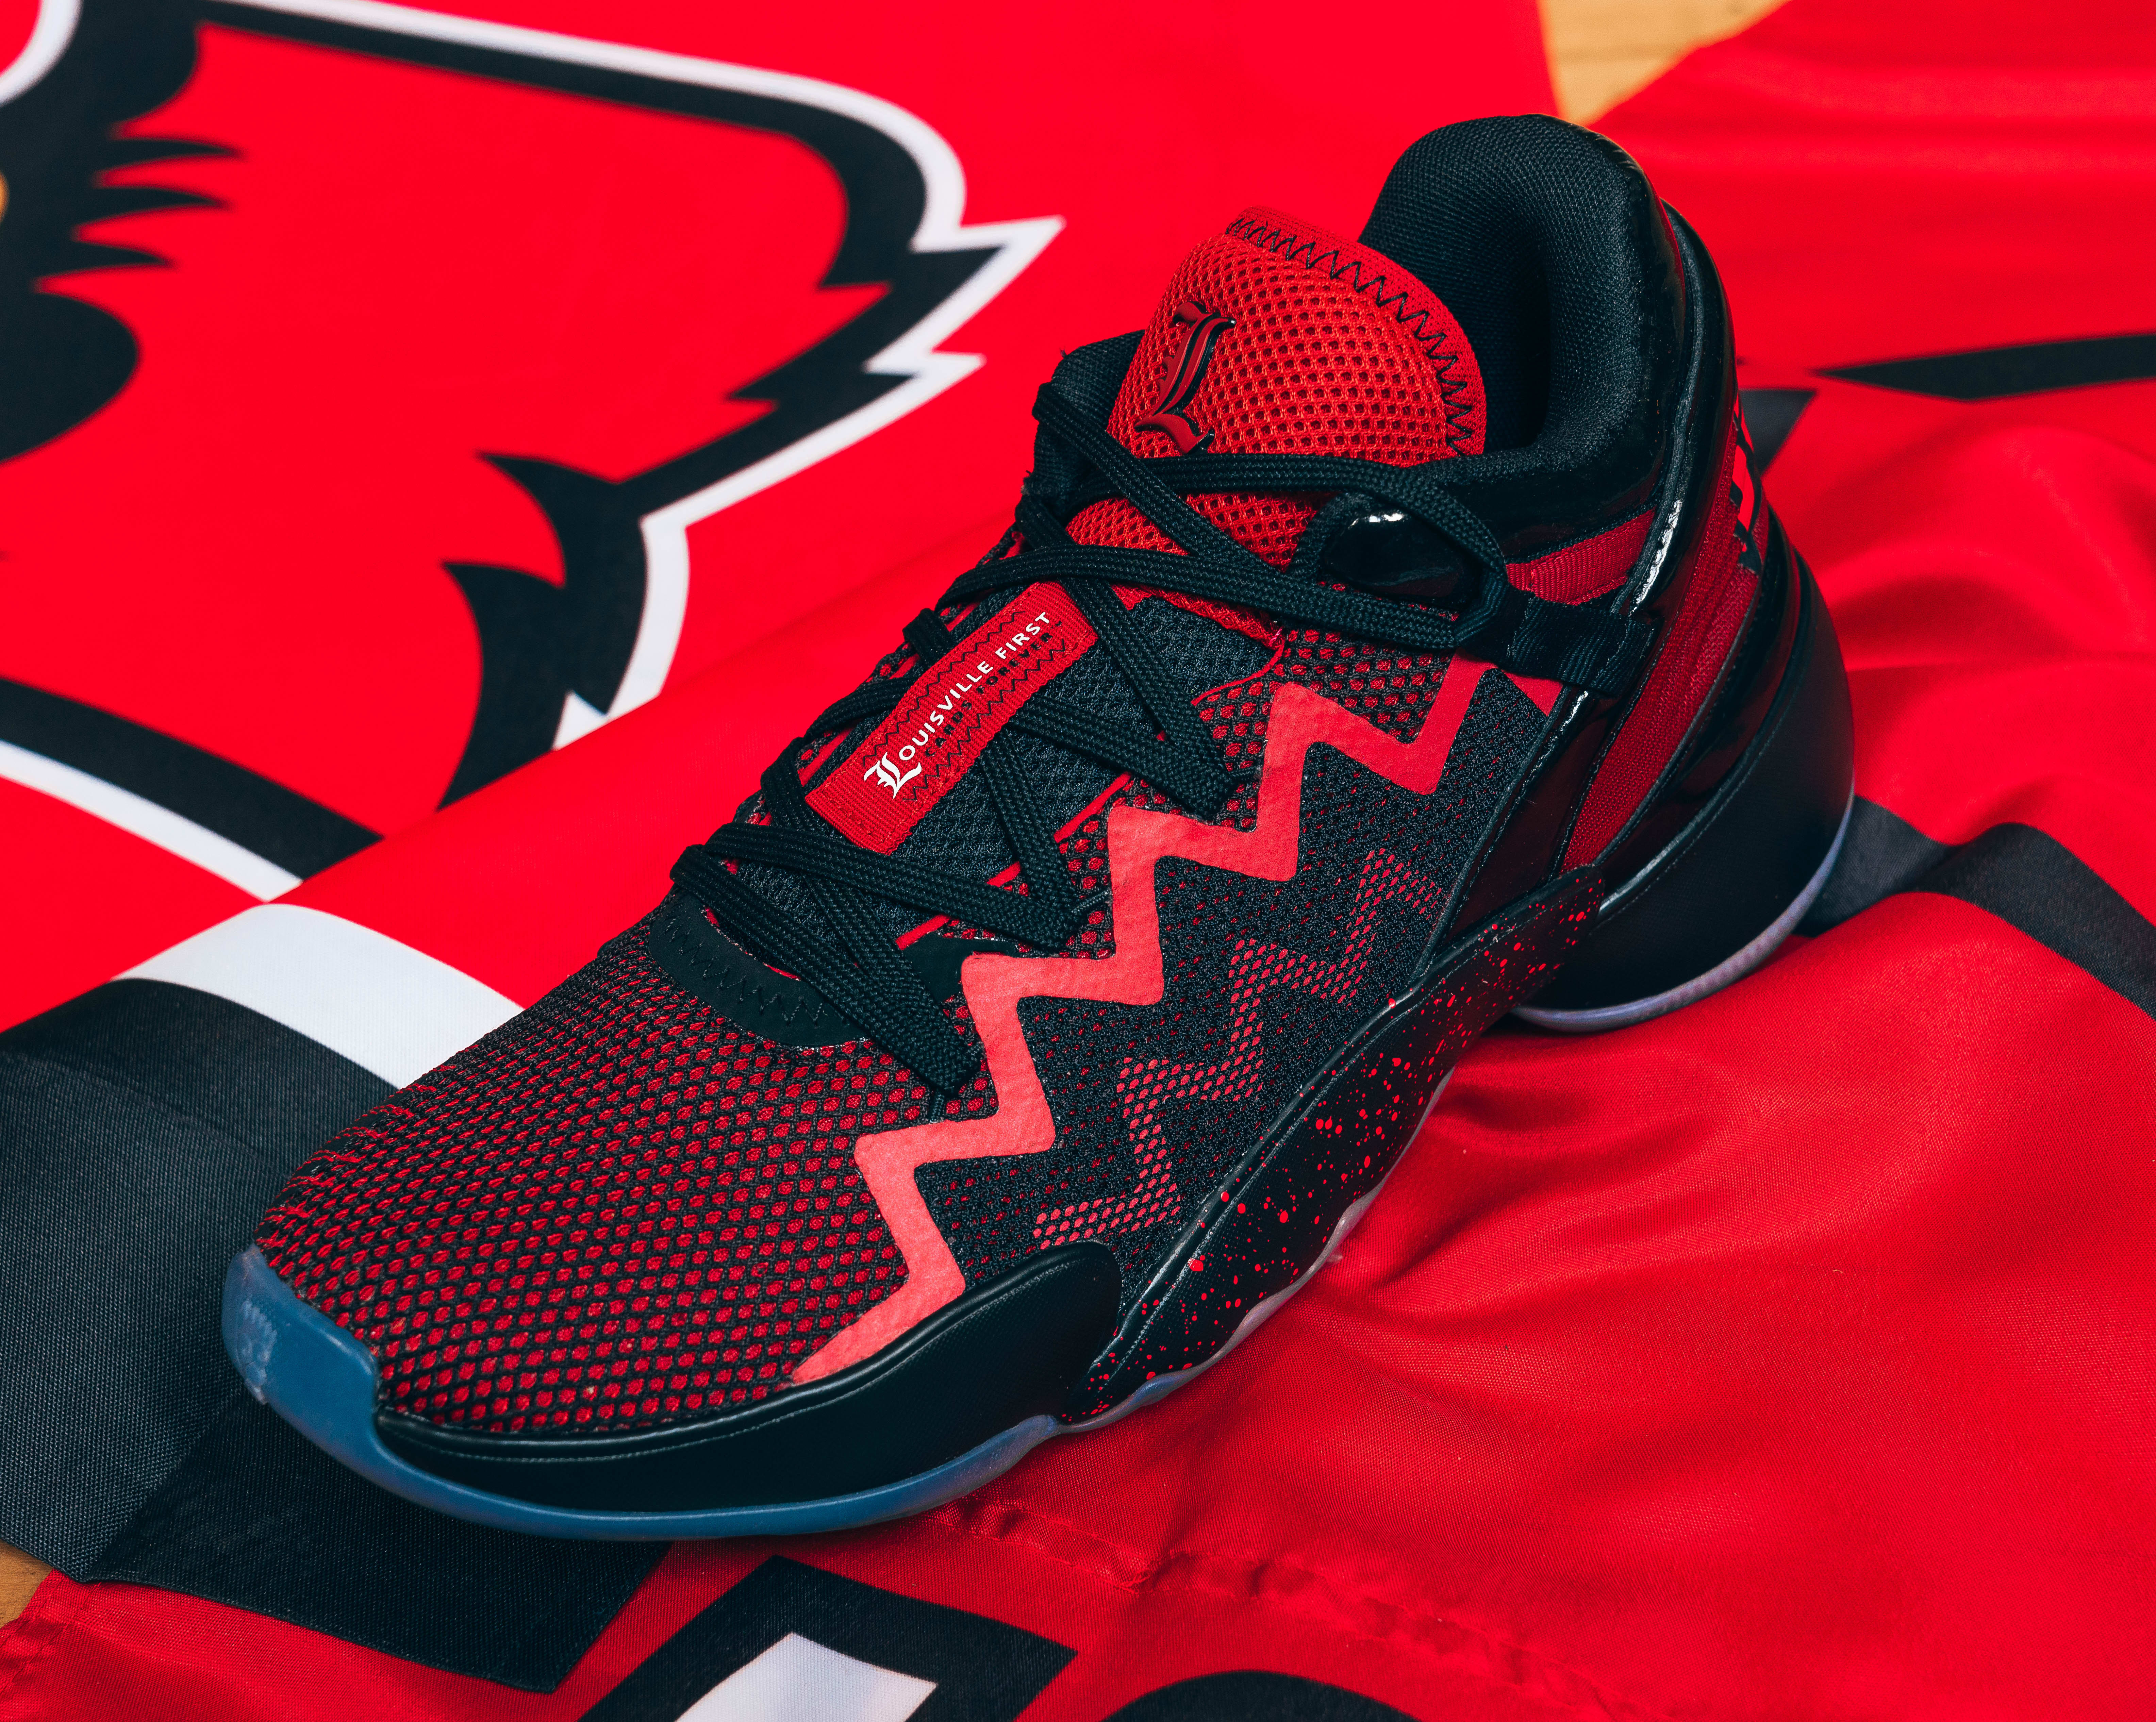 Louisville x Adidas D.O.N. Issue #2 &#x27;A Shoe For Change&#x27; Tongue